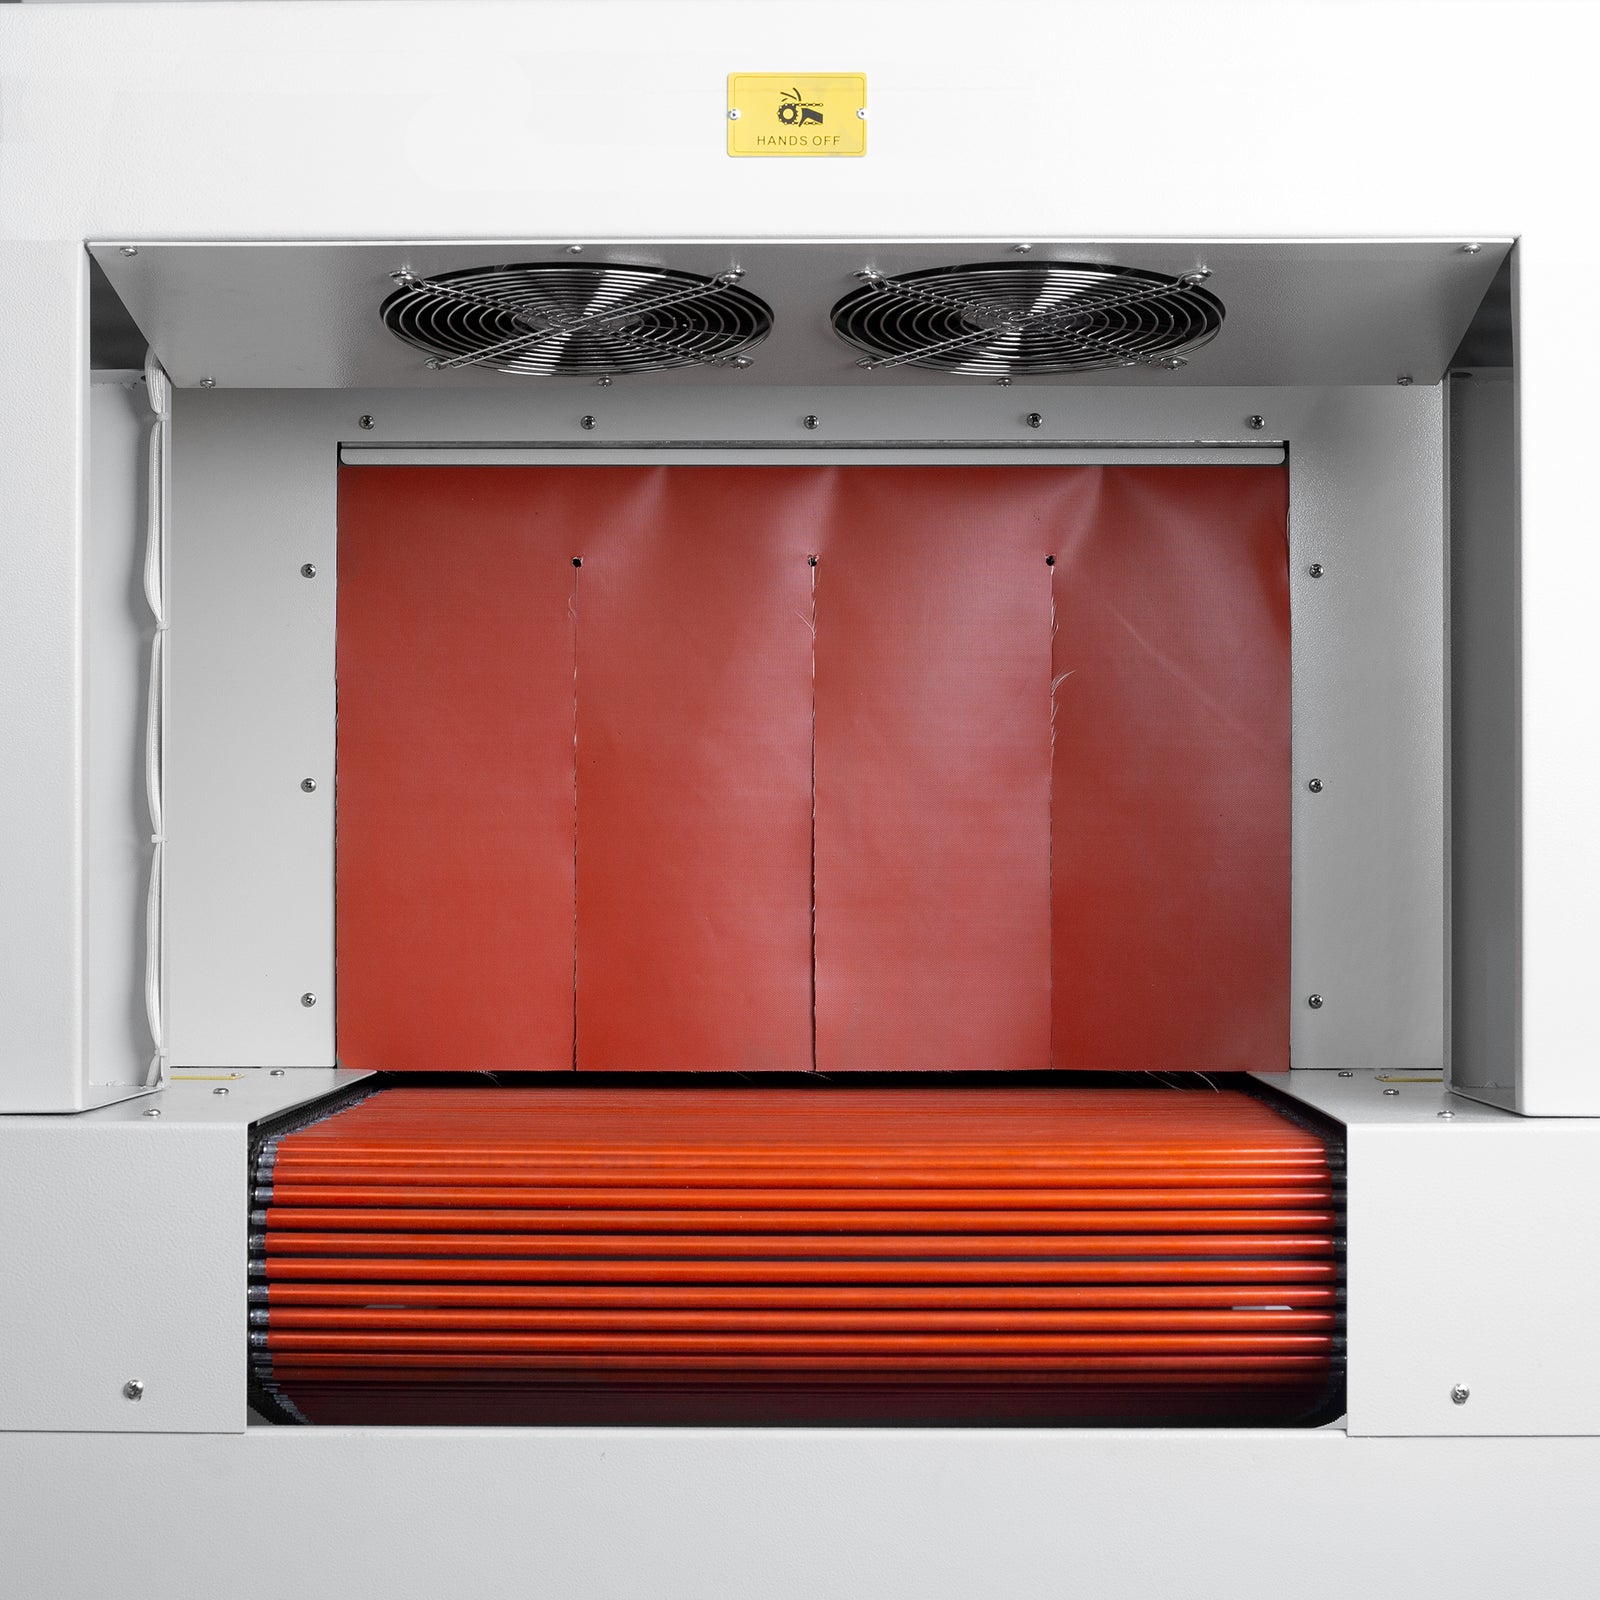 Close-up view of the exit of a heat shrink tunnel shows an orange heat-insulating curtain meant to preserve the tunnel's inner temperature. also shows 2 cooling fans positioned outside the tunnel as well as the the end of the roller conveyor.